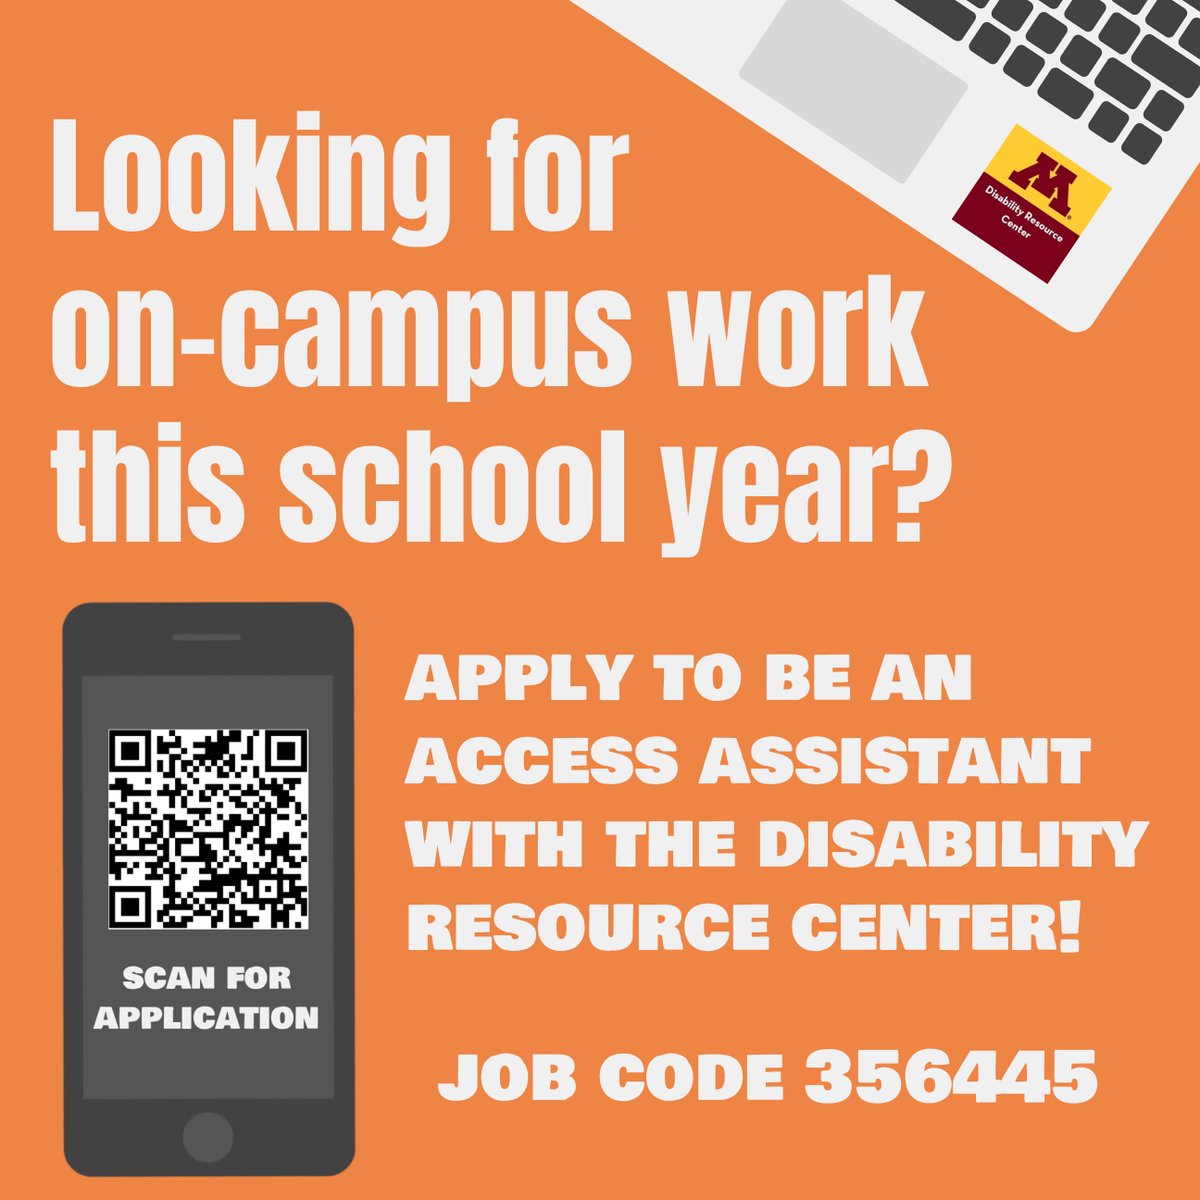 ❗️Attention undergraduate students❗Apply to be an access assistant with the Disability Resource Center! The DRC works with students, faculty/instructors, staff, & guests with documented disabilities to facilitate access. Apply: hr.umn.edu/Jobs/Find-Job; search job code 356445